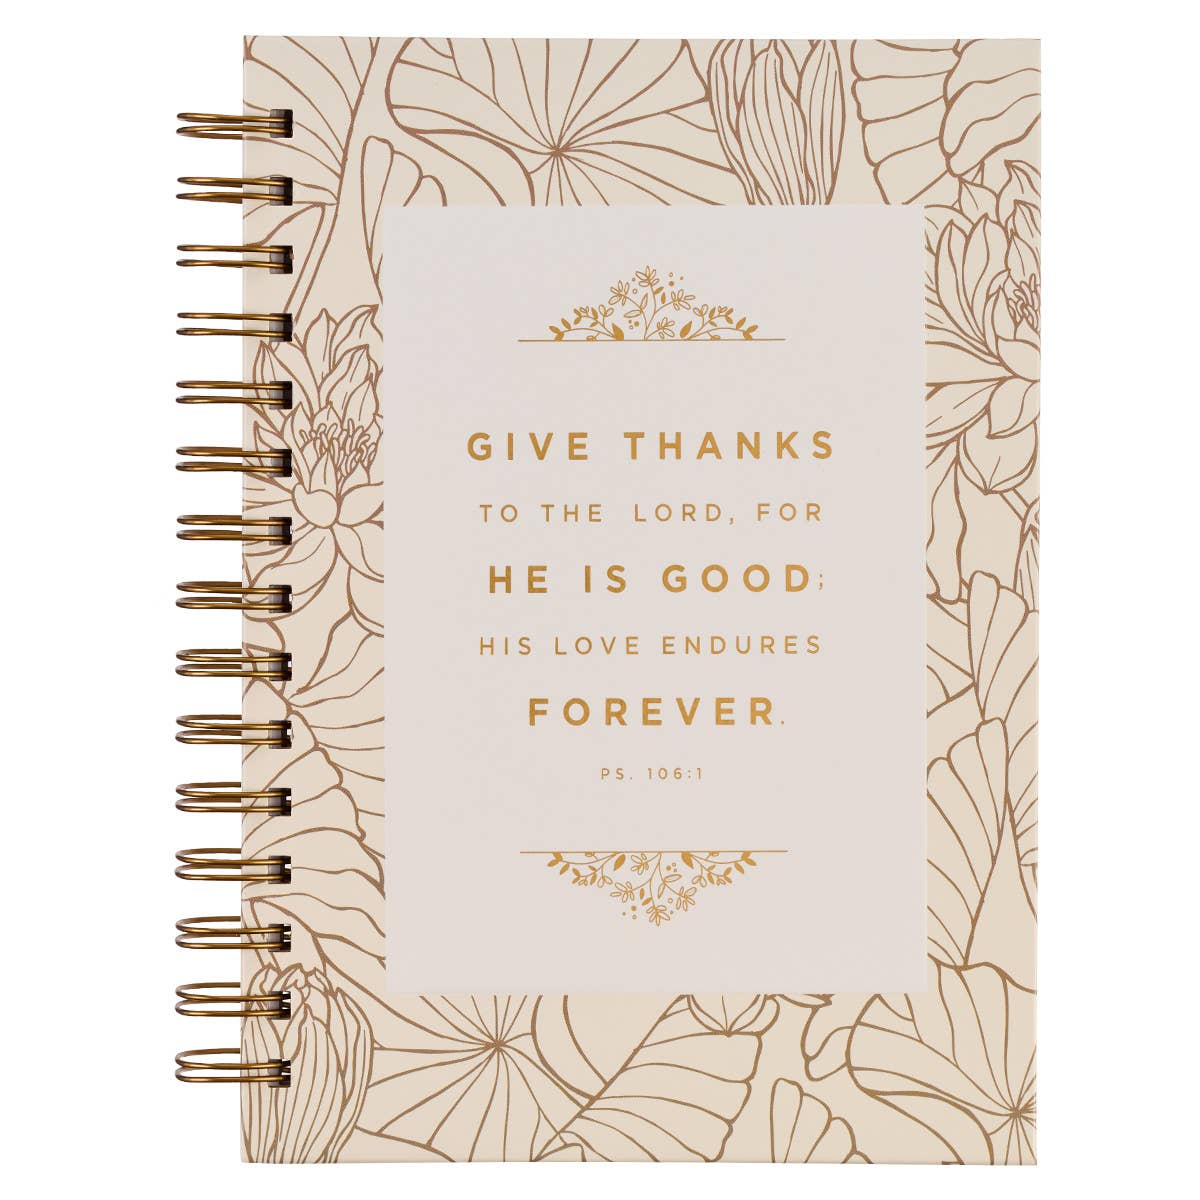 Give Thanks White and Gold Wirebound Journal - Pslam 106:1